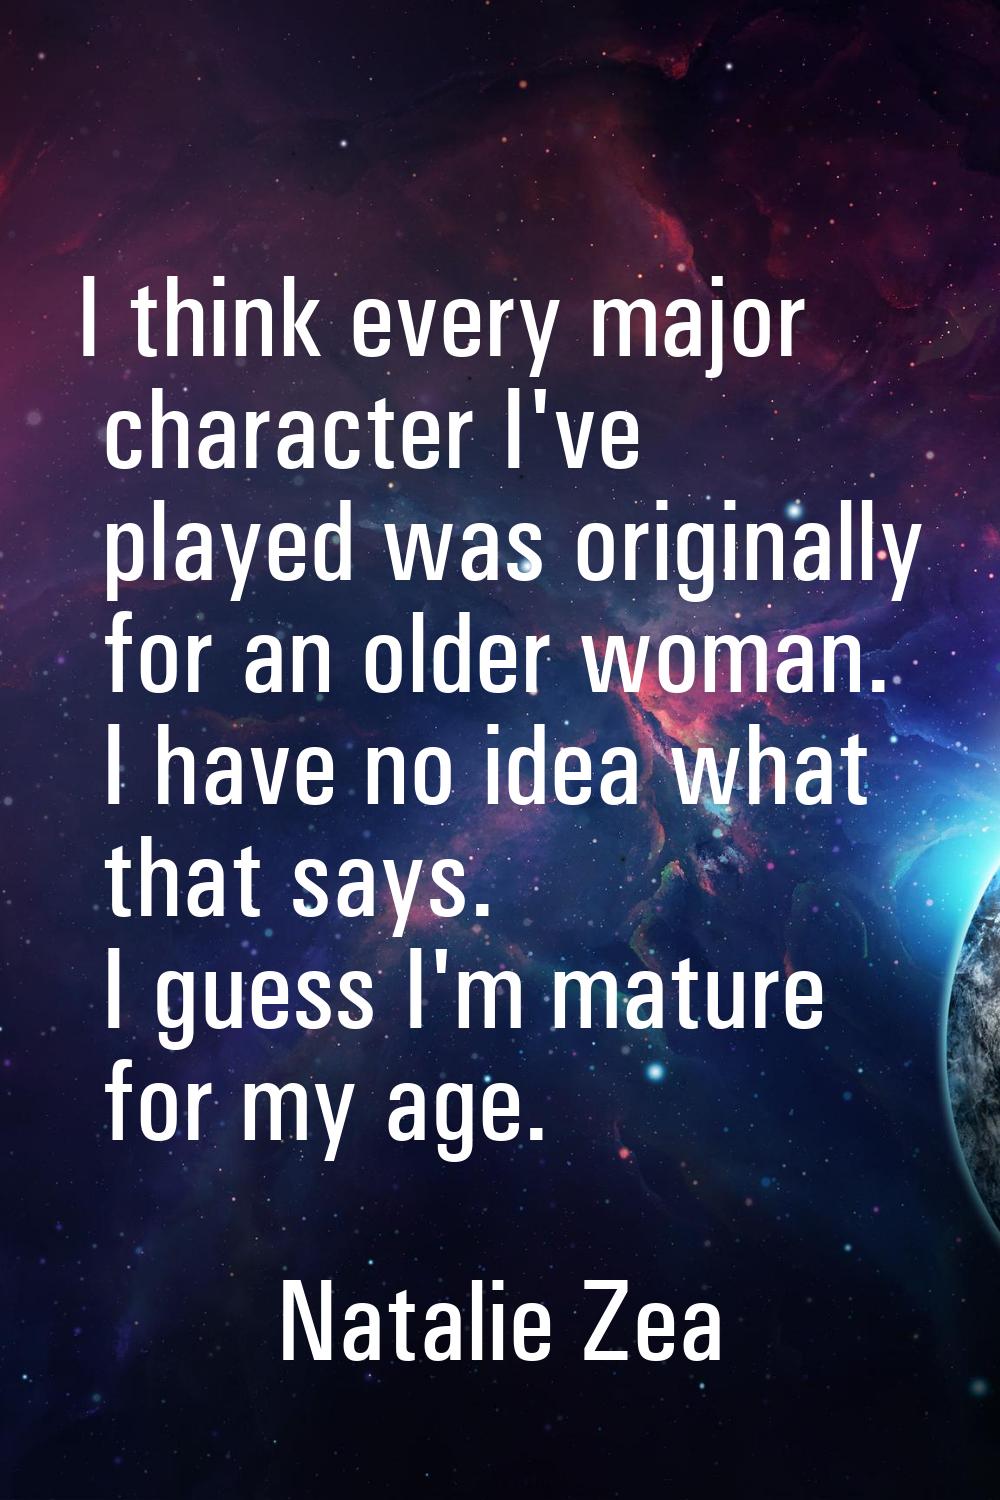 I think every major character I've played was originally for an older woman. I have no idea what th